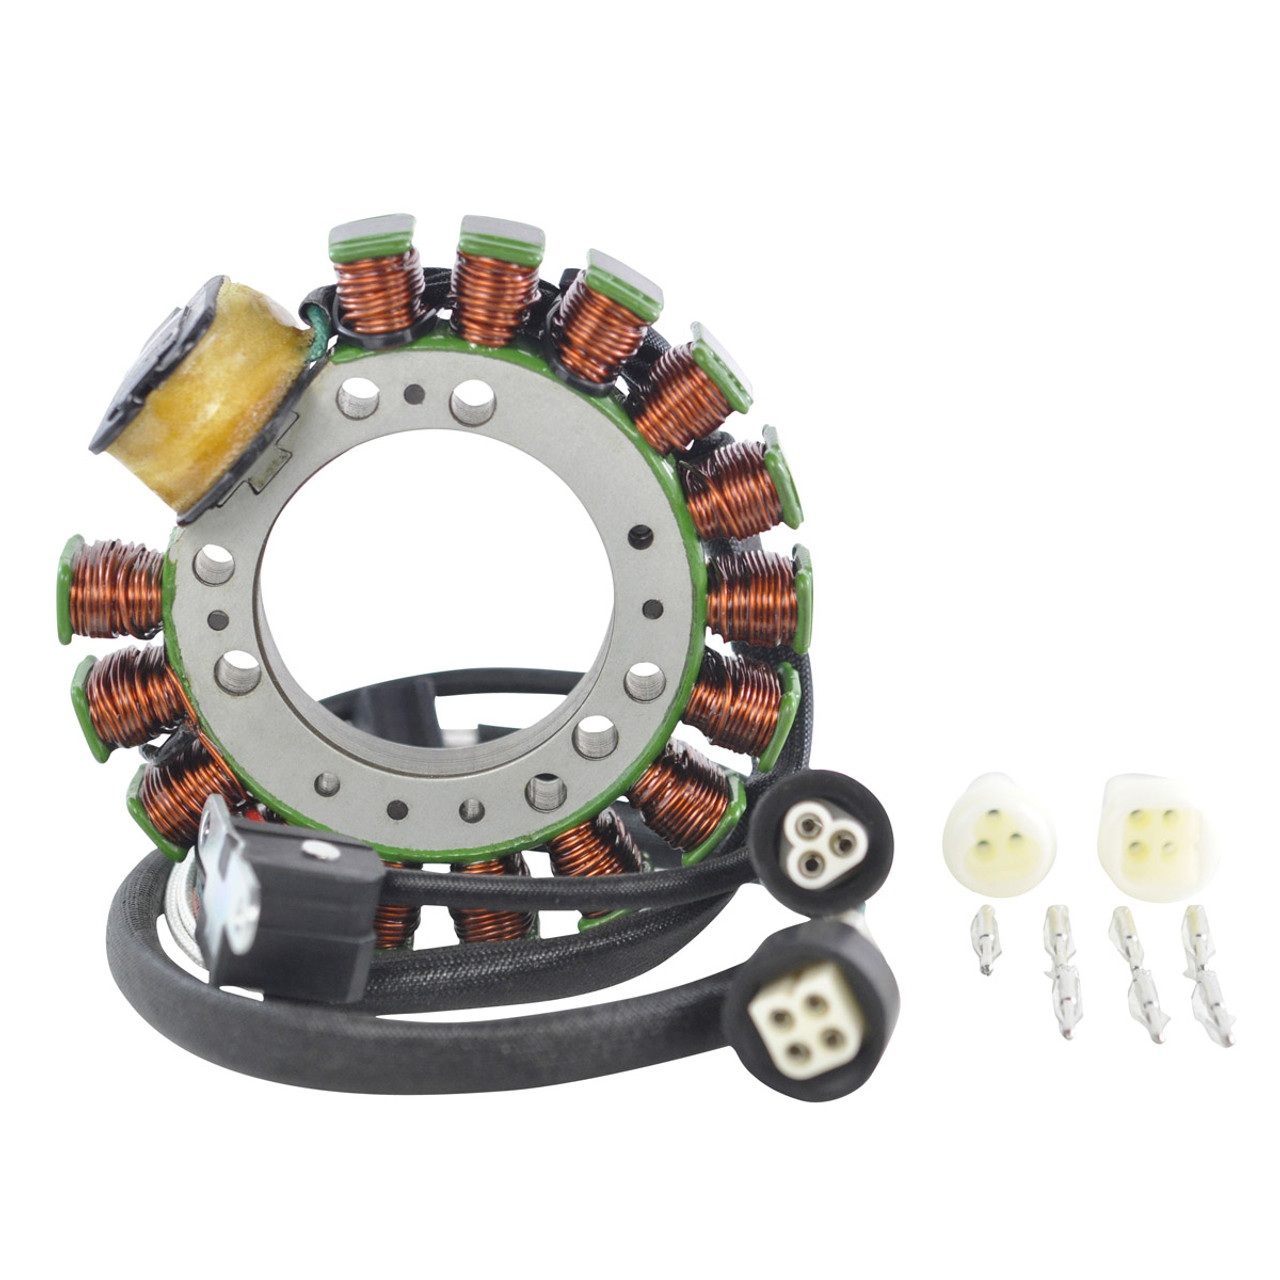 RMSTATOR New Aftermarket Yamaha Kit Stator + External Ignition Coil + Crankcase Cover Gasket, RM22863